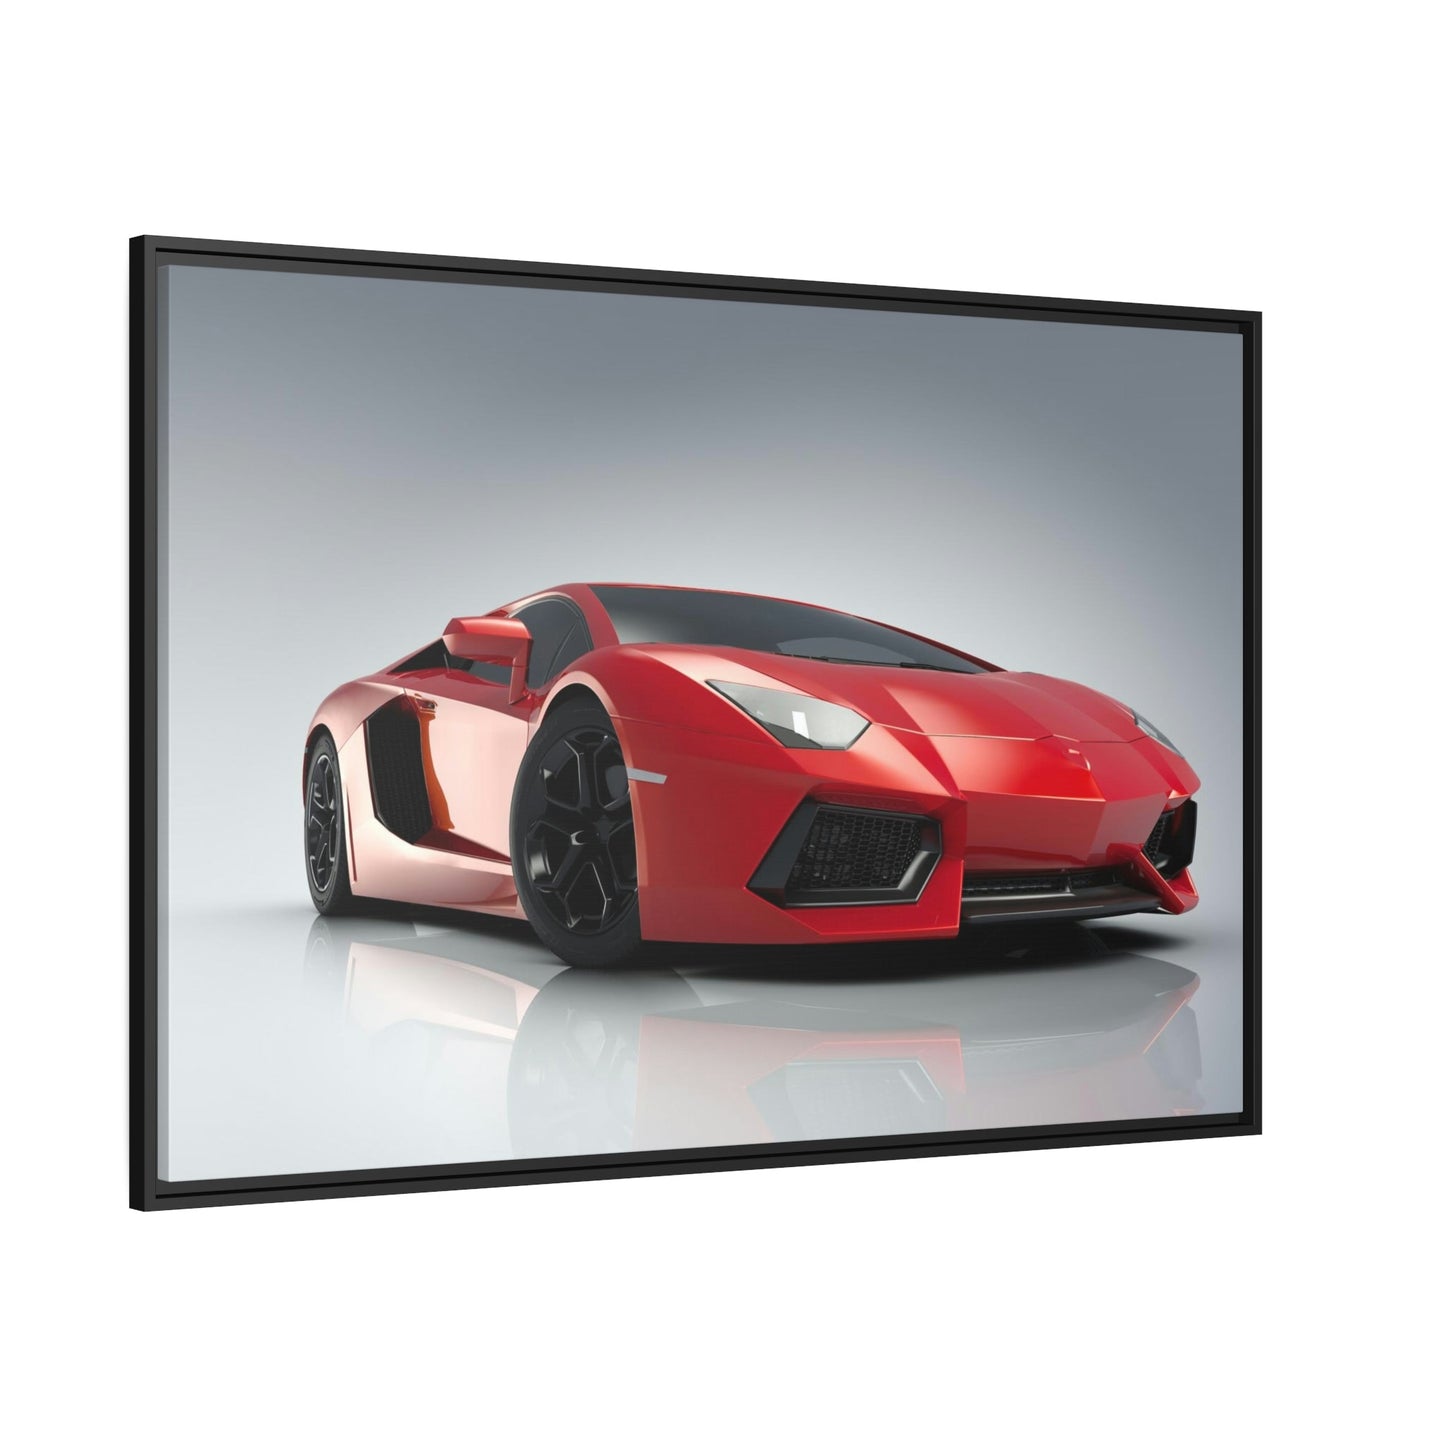 Legend on Your Wall: Lamborghini Poster on Quality Print